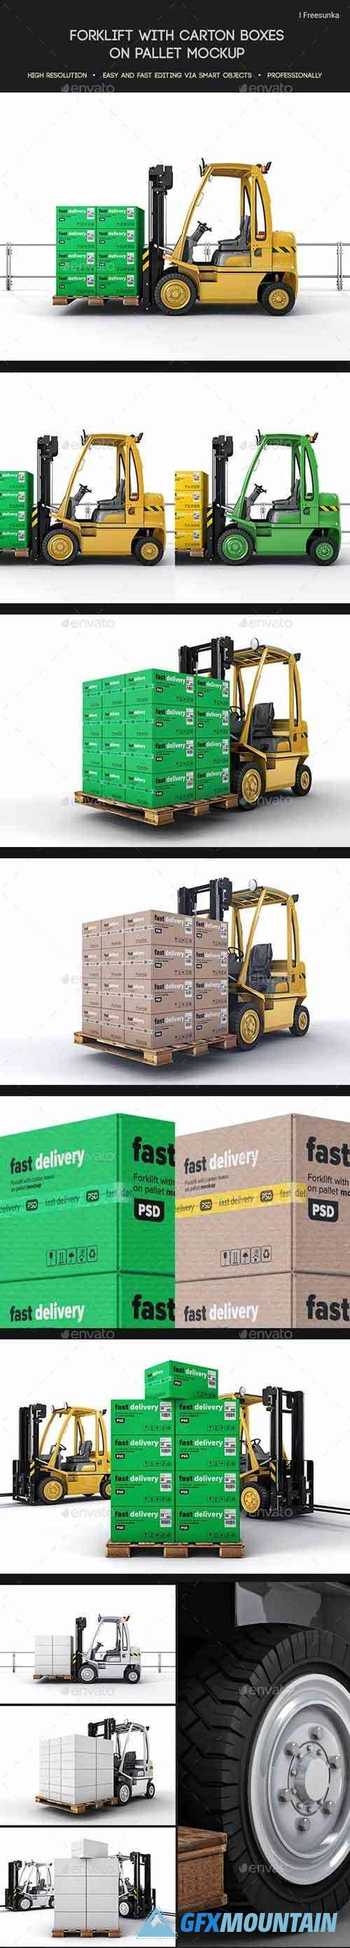 Download Forklift With Carton Boxes On Pallet Mockup Free Download Graphics Fonts Vectors Print Templates Gfxmountain Com